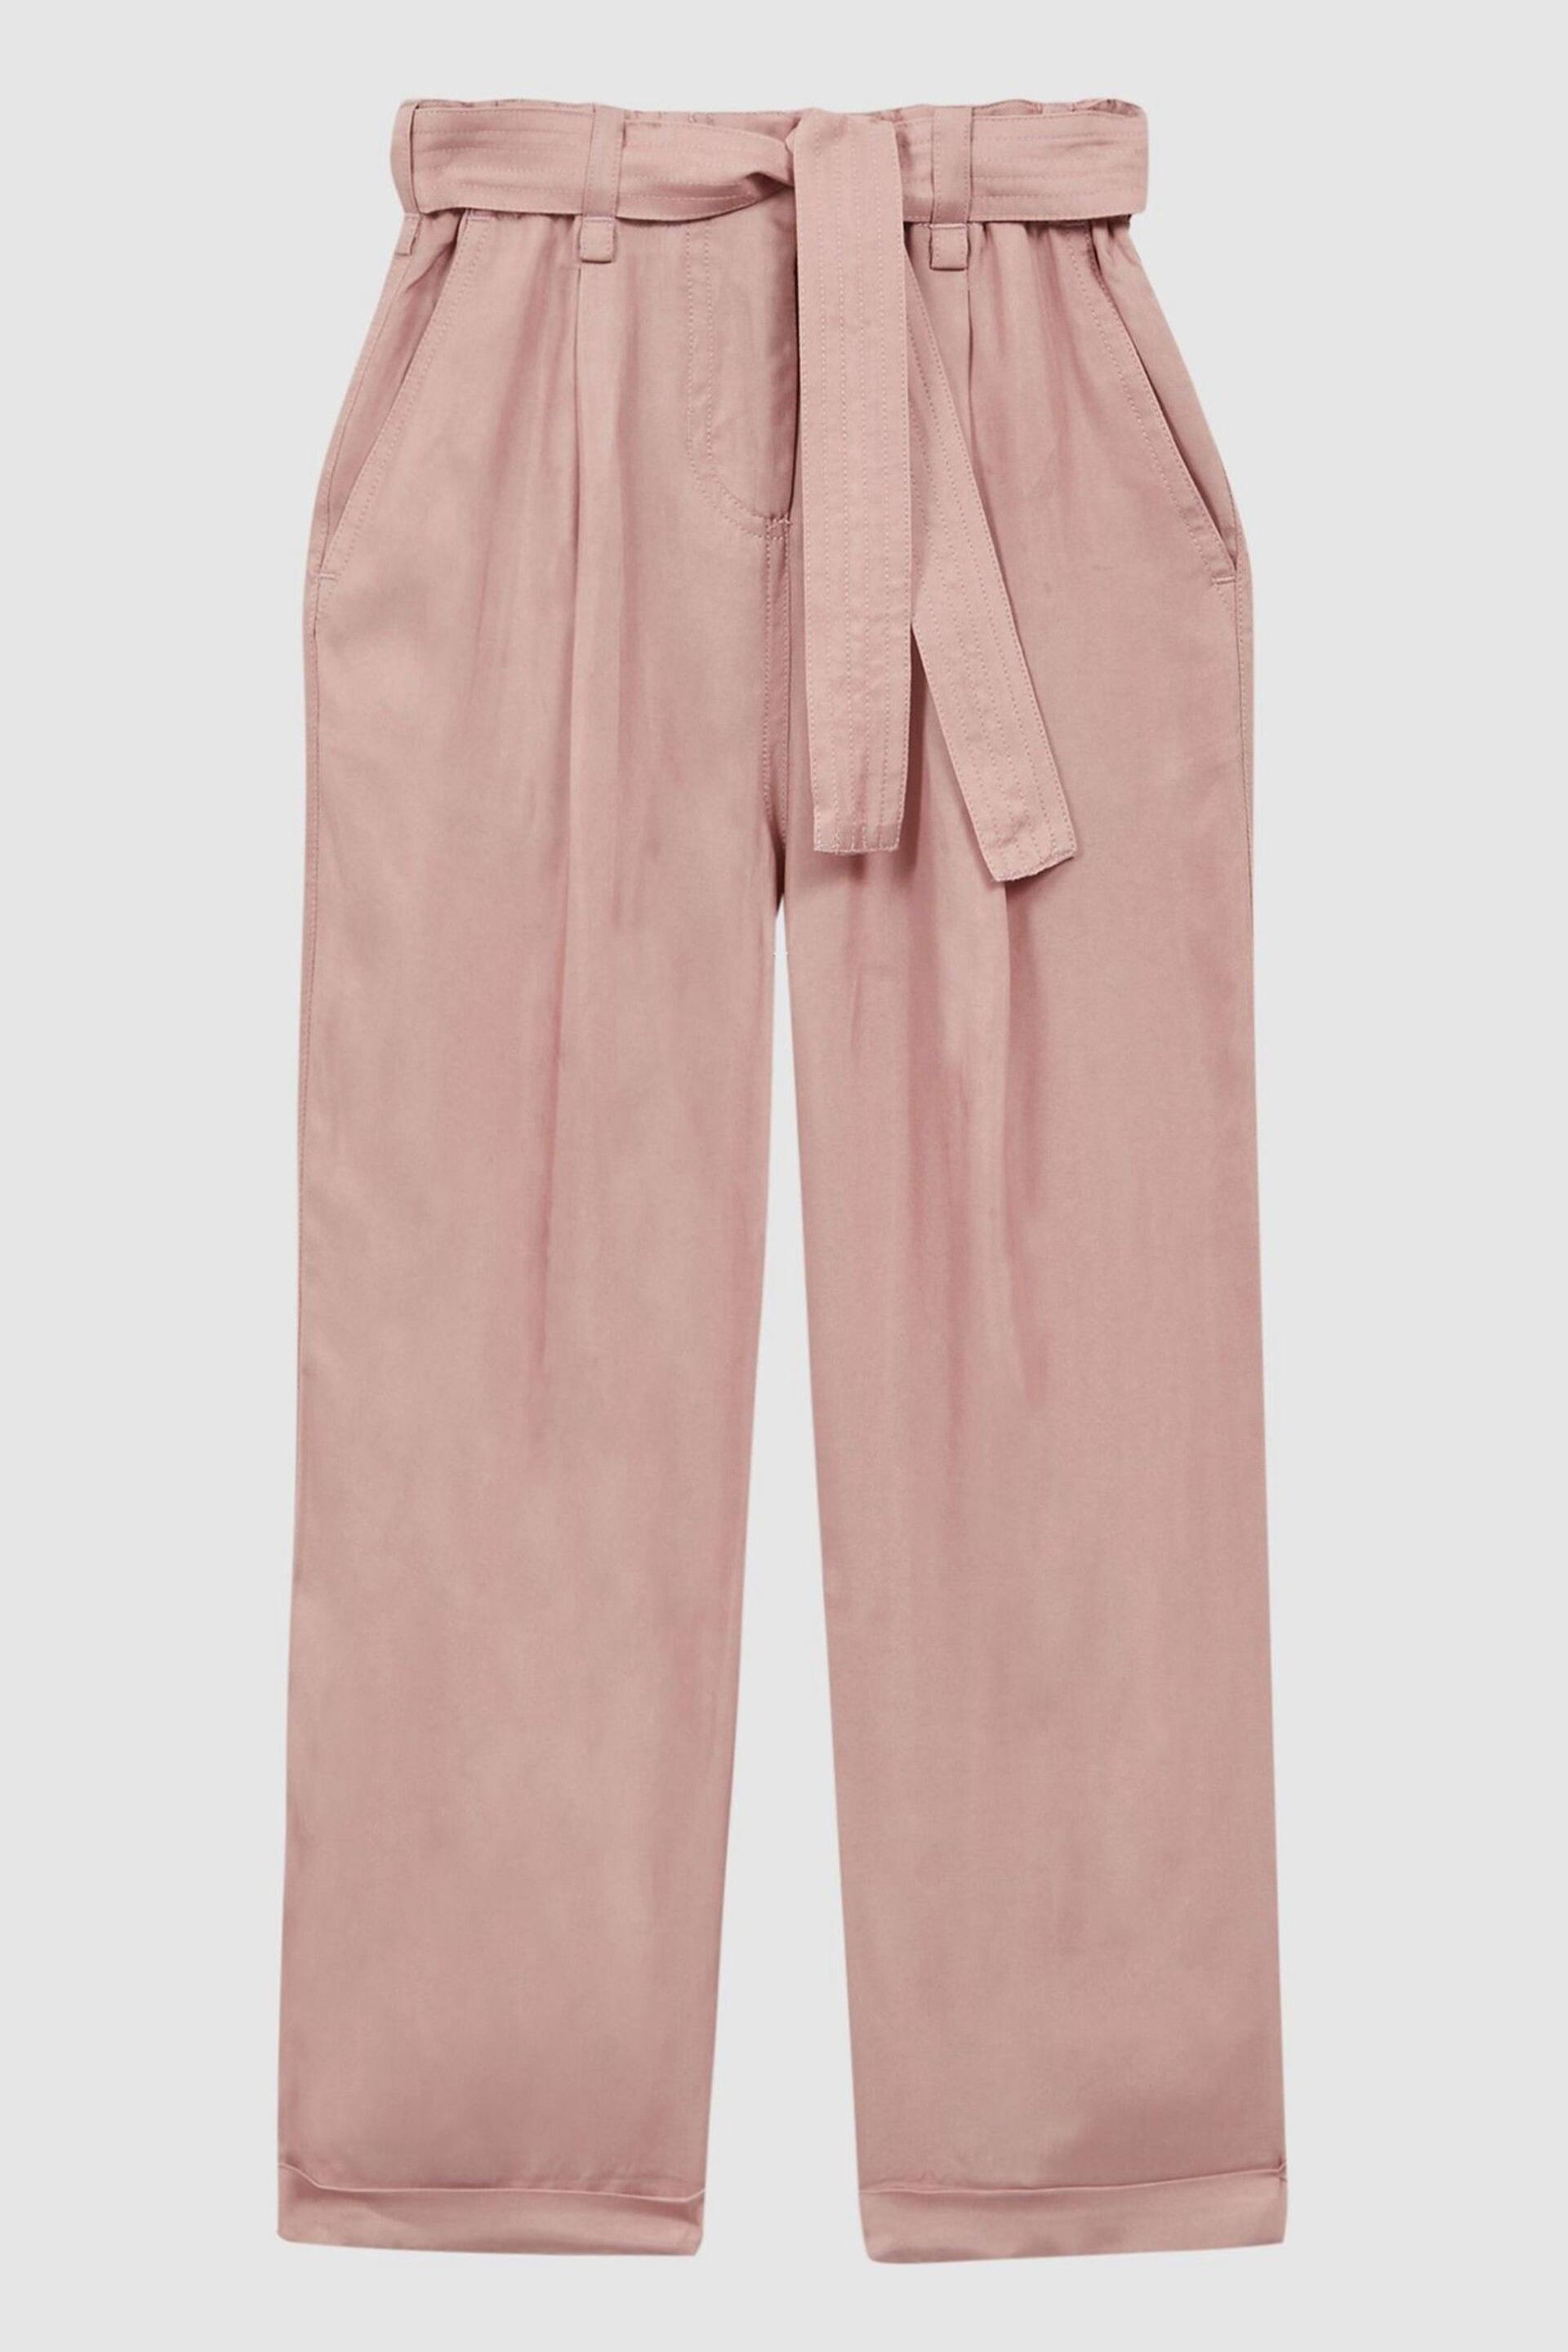 Reiss Pink Joanie Senior Paper Bag Cargo Trousers - Image 2 of 5